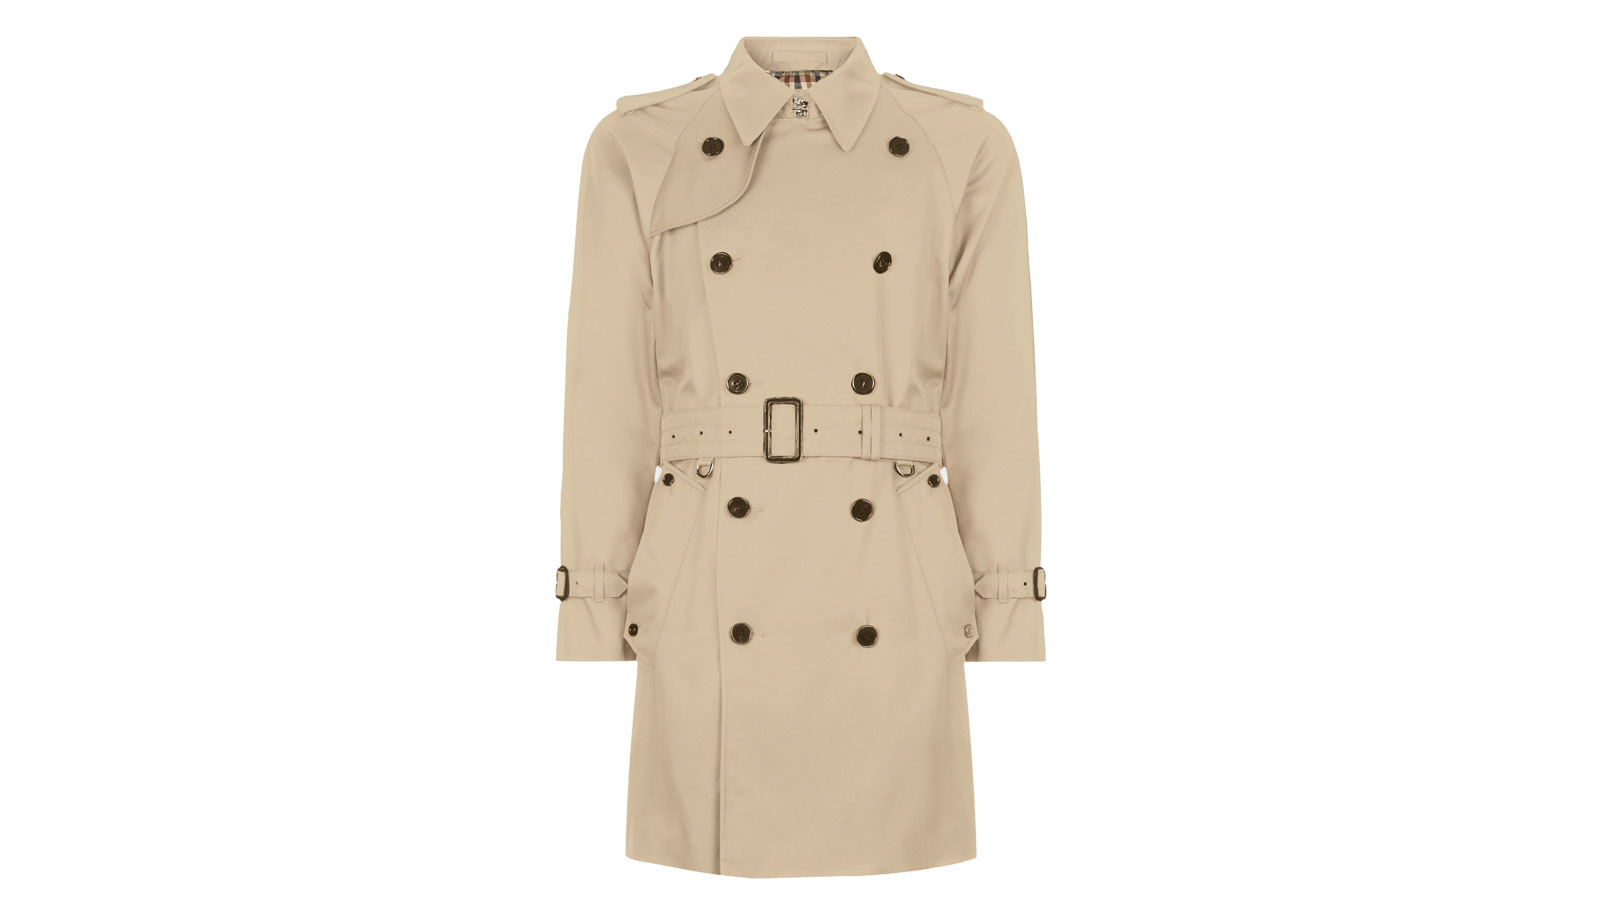 Aquascutum Corby Double Breasted Men's Trench Coat | The Best Men's Trench Coats